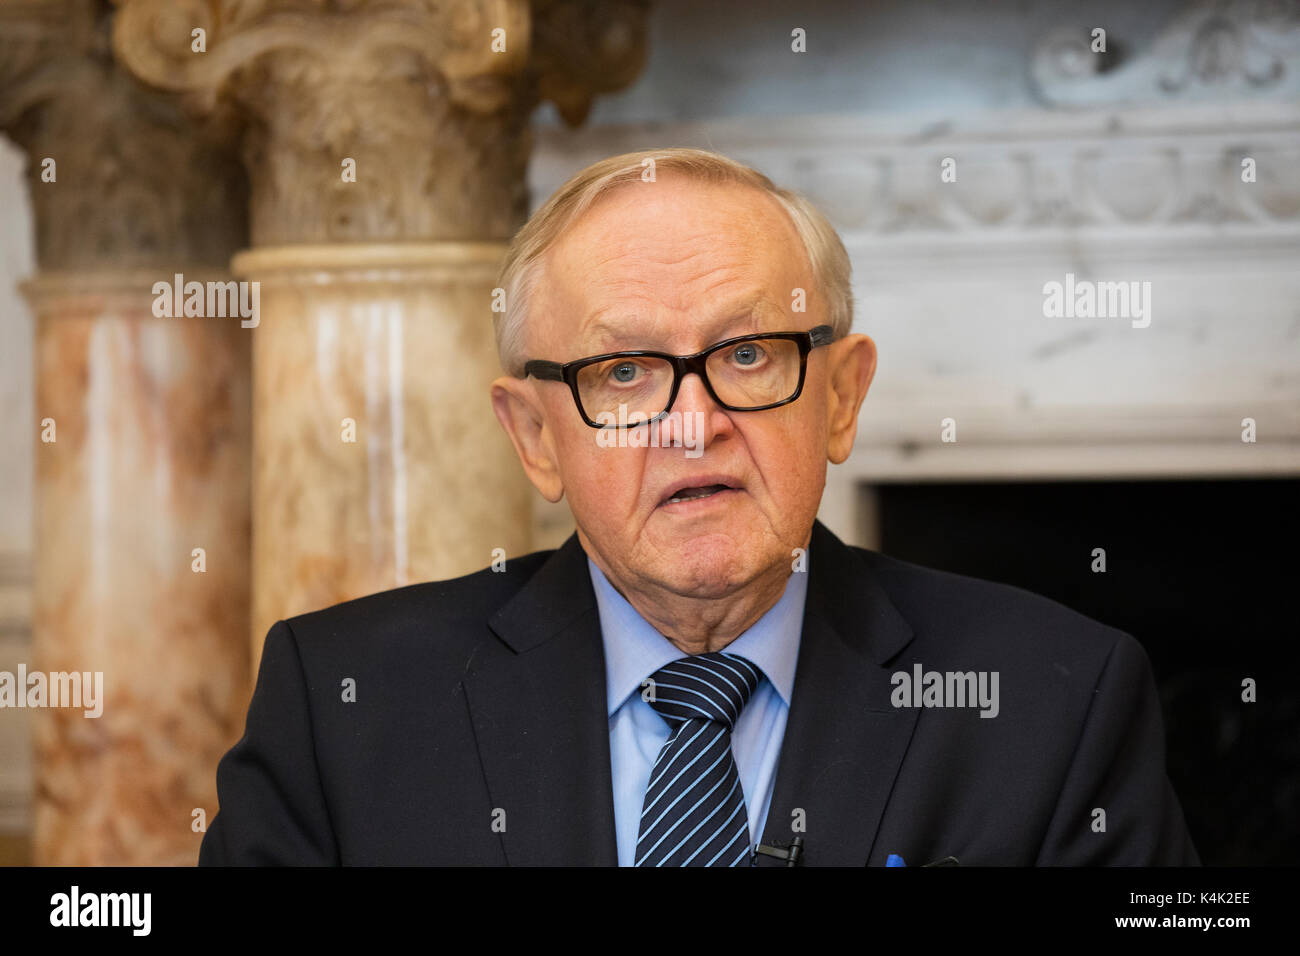 Dublin, Ireland. 6th Sep, 2017. Former President of Finland and Nobel Laureate, Mr. Martti Ahtisaari was in Ireland today to deliver a keynote address on “The Role of the EU in Conflict Resolution”. Martti Ahtisaari was awarded the Nobel Peace Prize in 2008 for “his important efforts, on several continents and over more than three decades, to resolve international conflicts”. Amongst these was his role in the Northern Ireland Peace Process on the crucial and very sensitive issue of weapons decommissioning. Photo by Peter Cavanagh - Must Credit Stock Photo